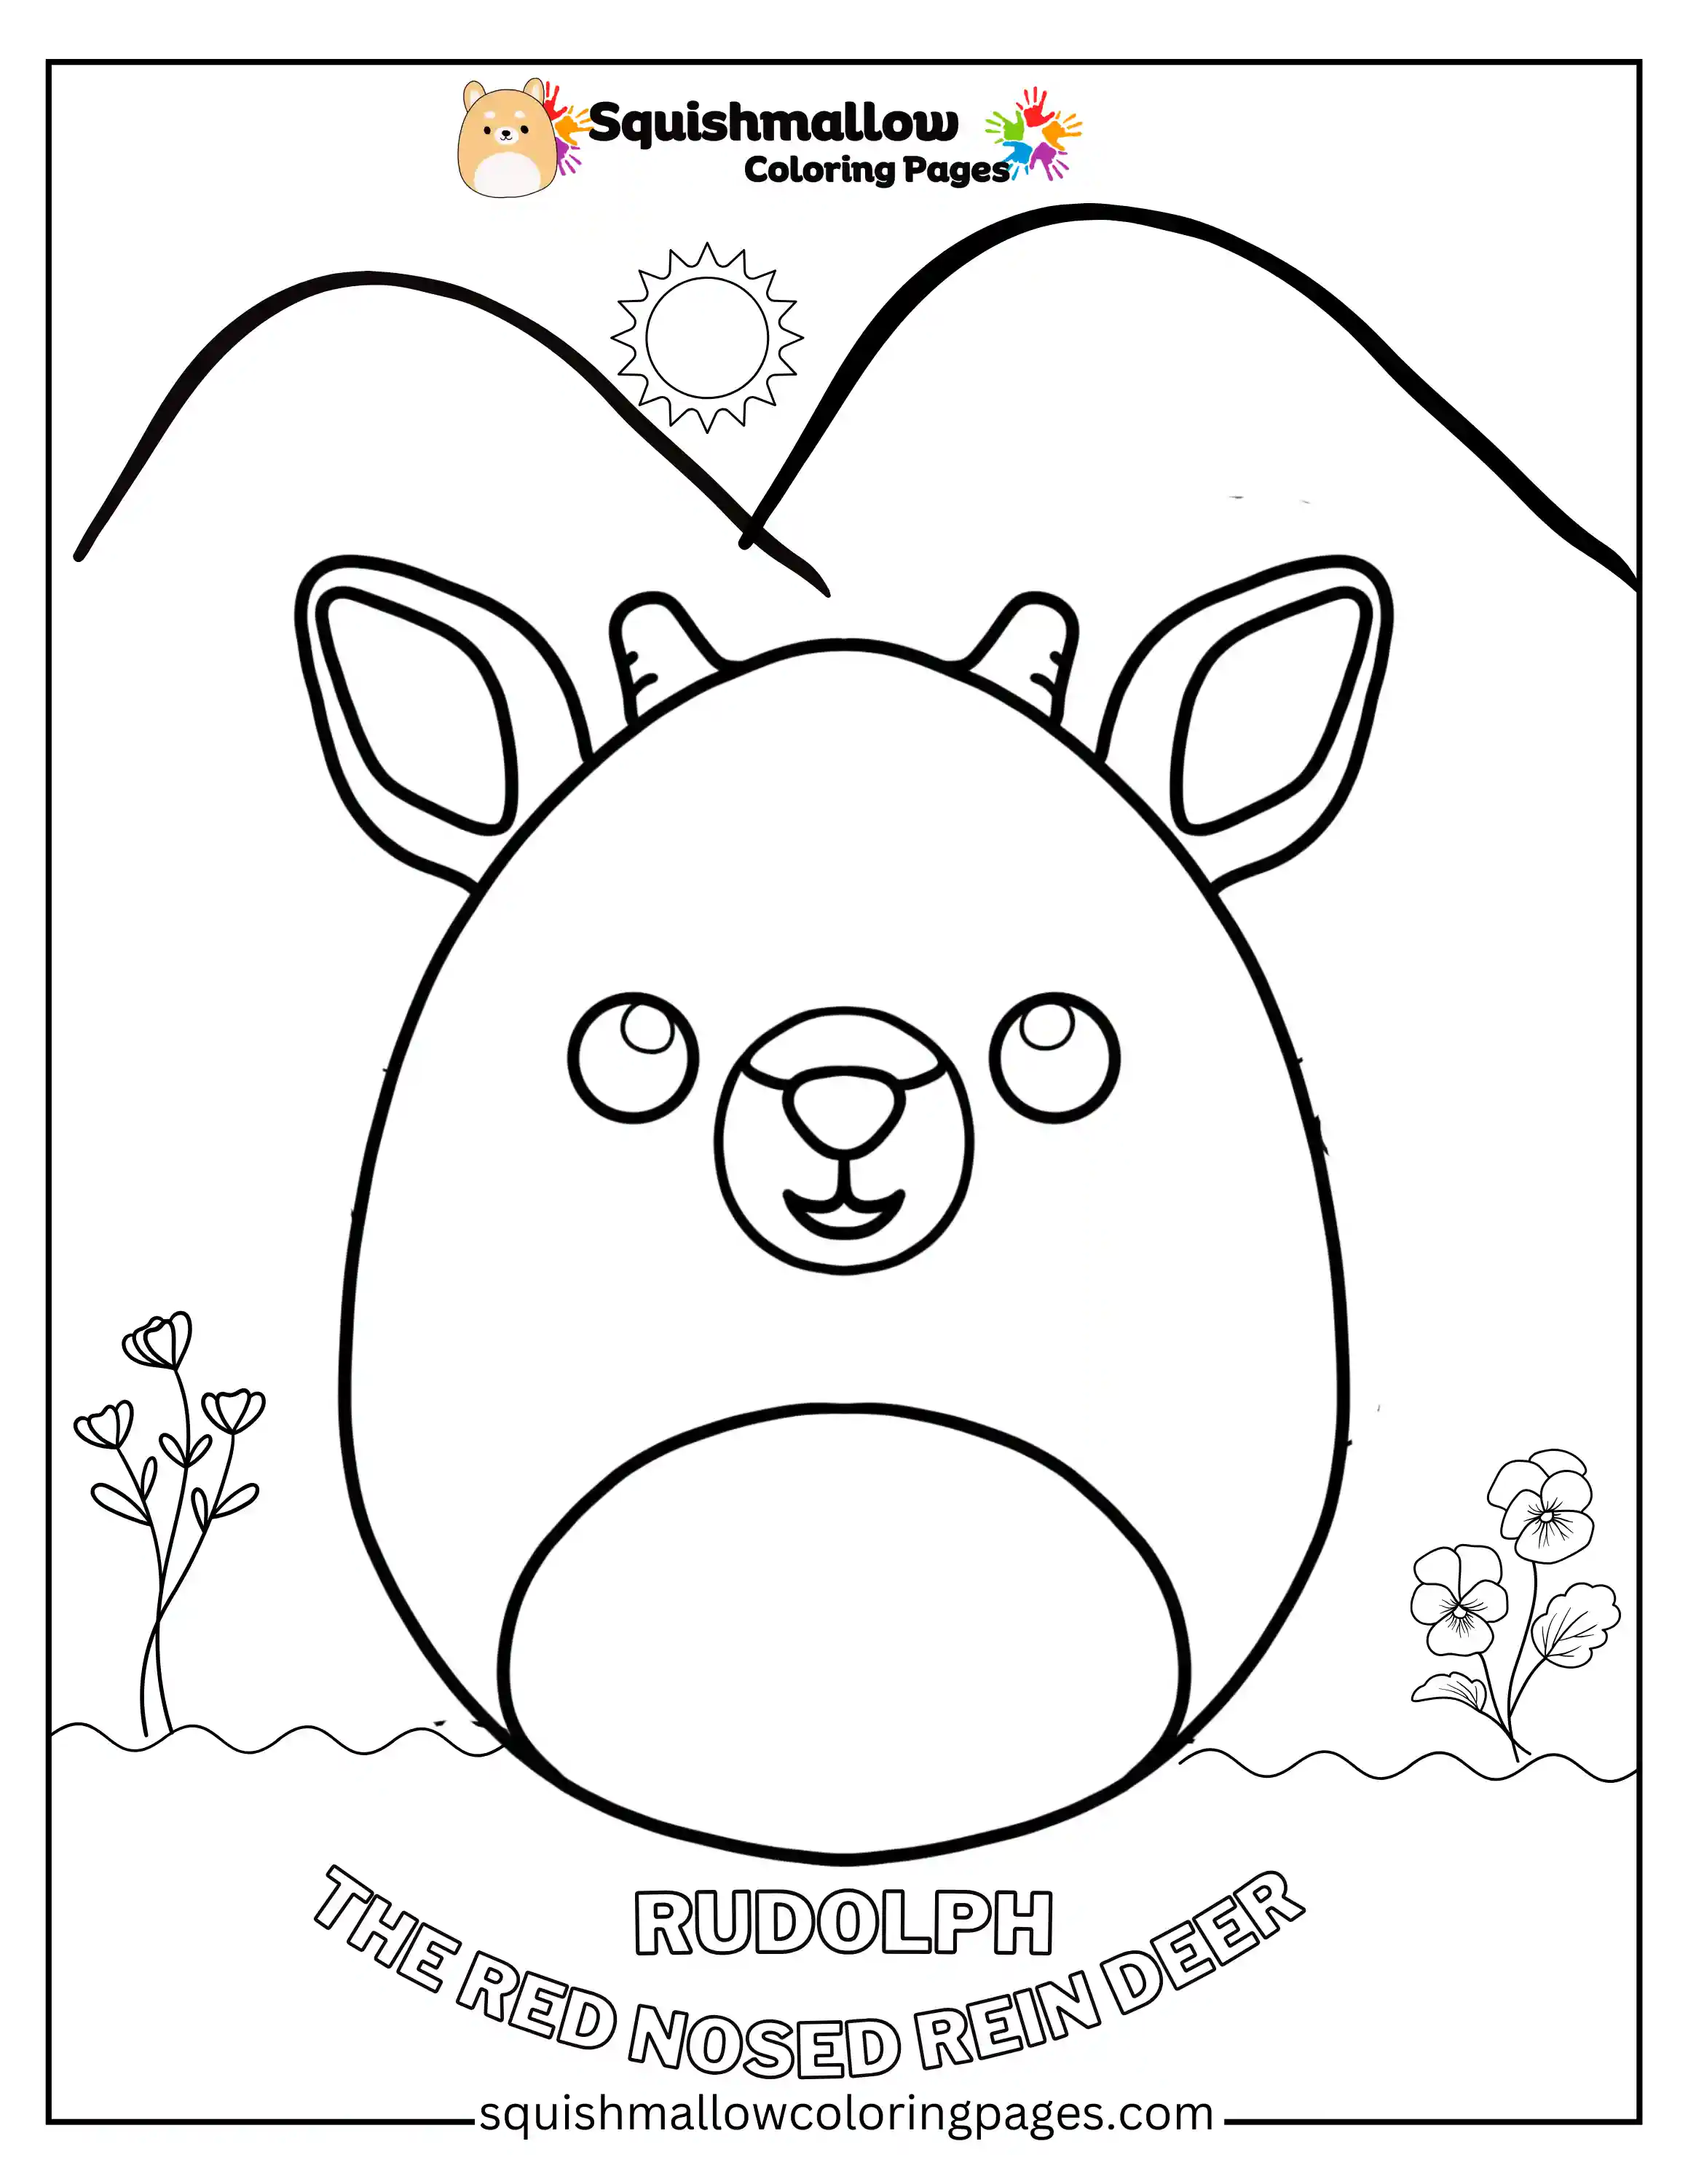 Rudolph The Red Nose Rein Deer Squishmallow Coloring Pages